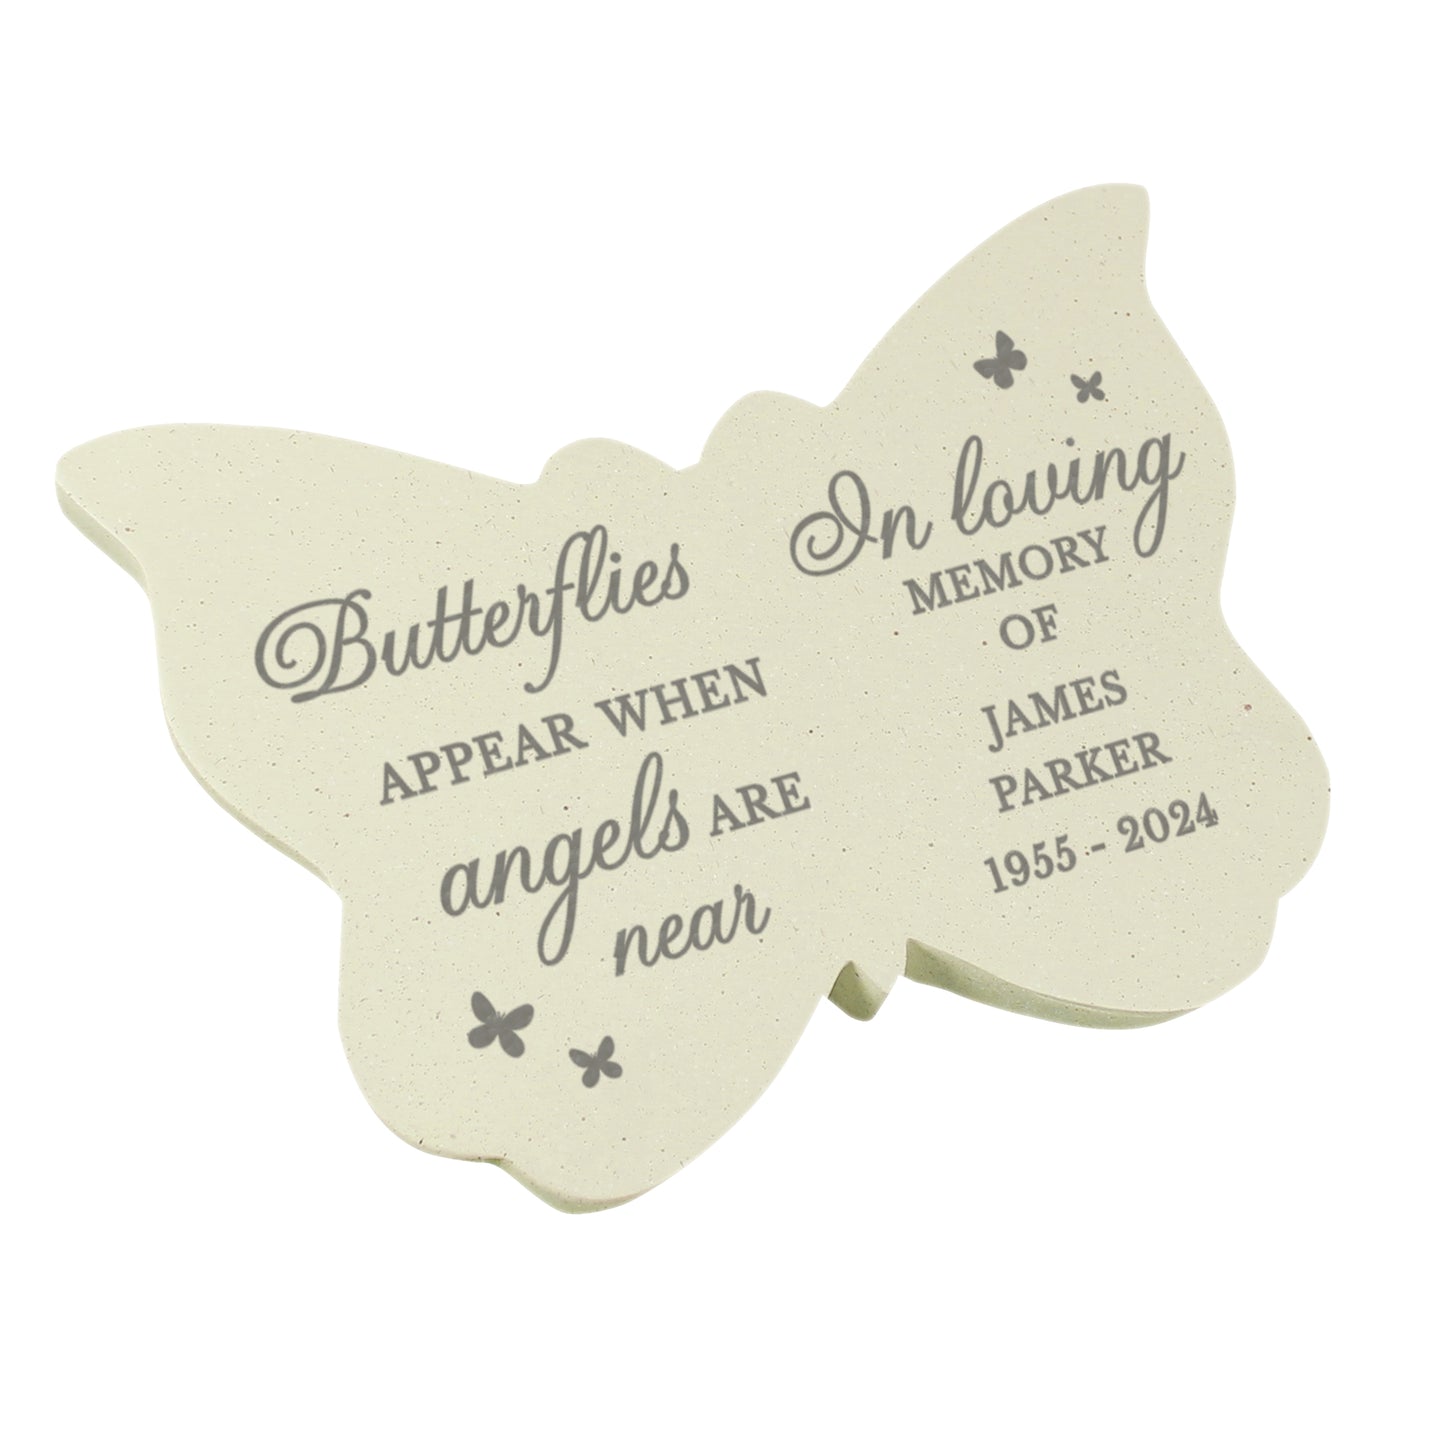 Personalised Outdoor Memorial Butterfly Tribute. '... When Angels Are Near'